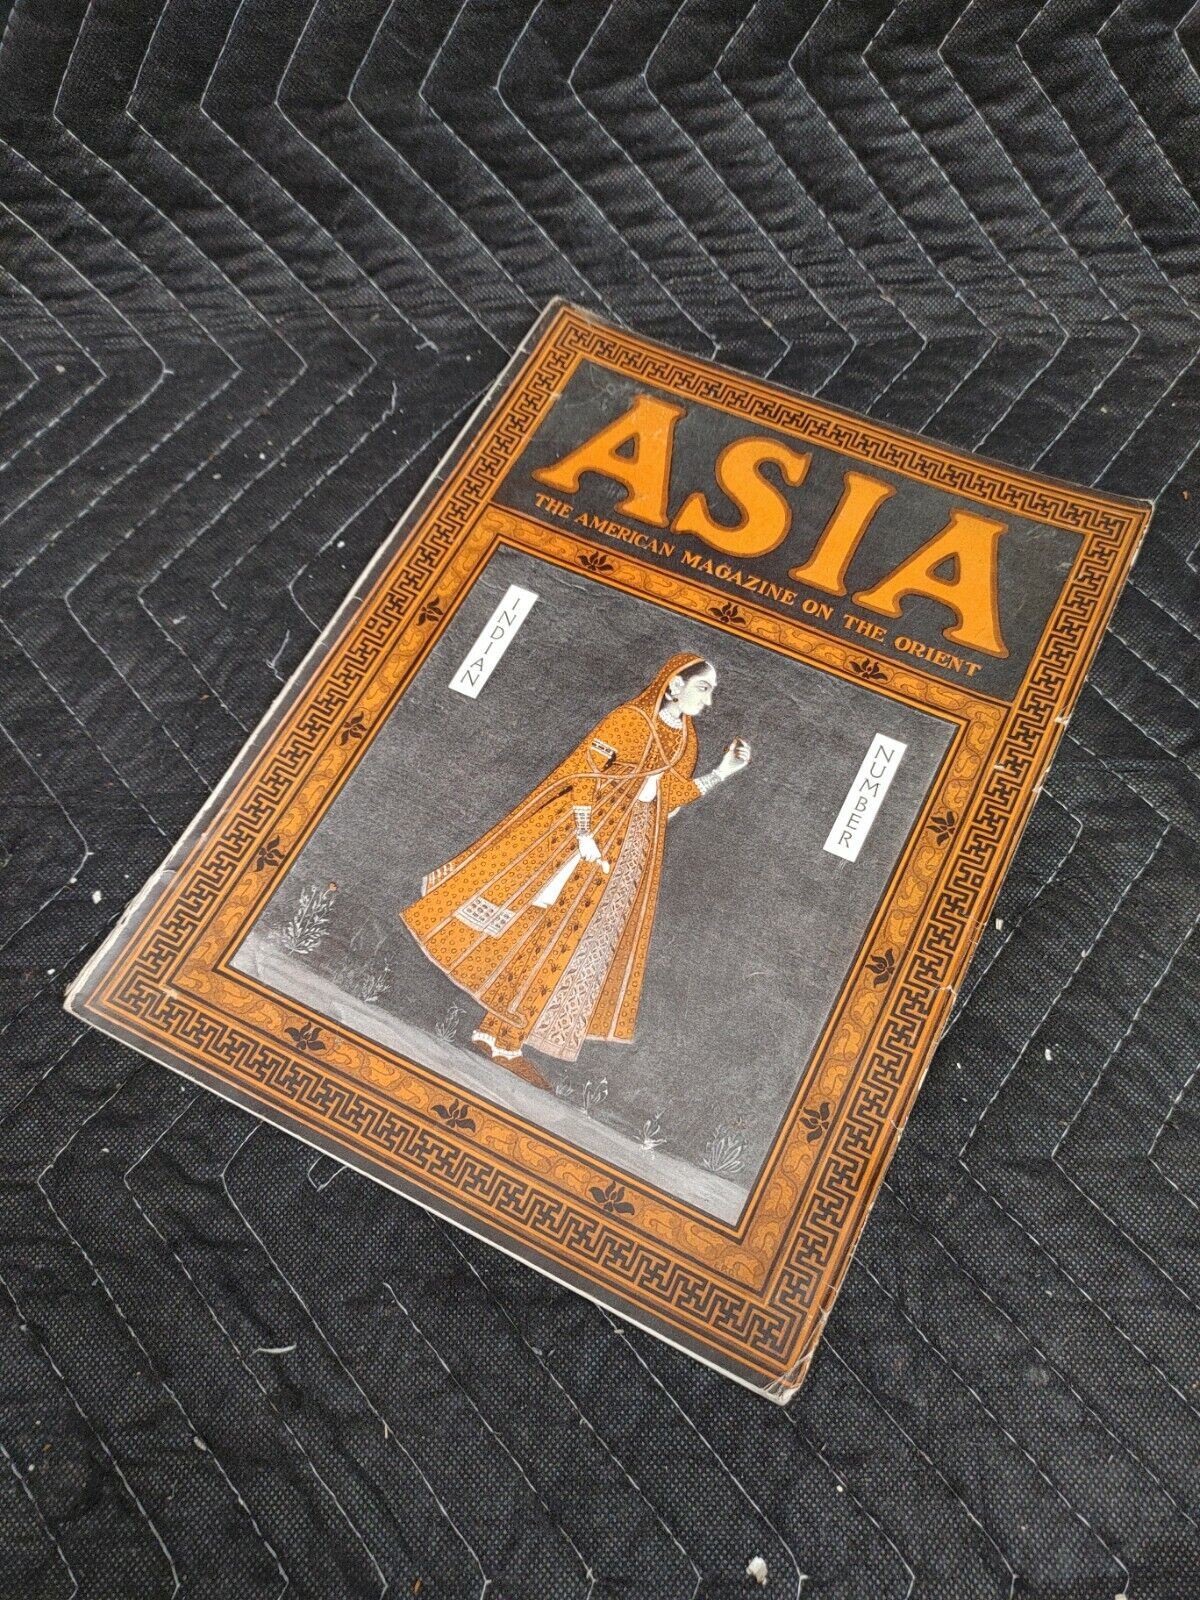 Antique March 1923 Asia Magazine, The American Magazine on the Orient